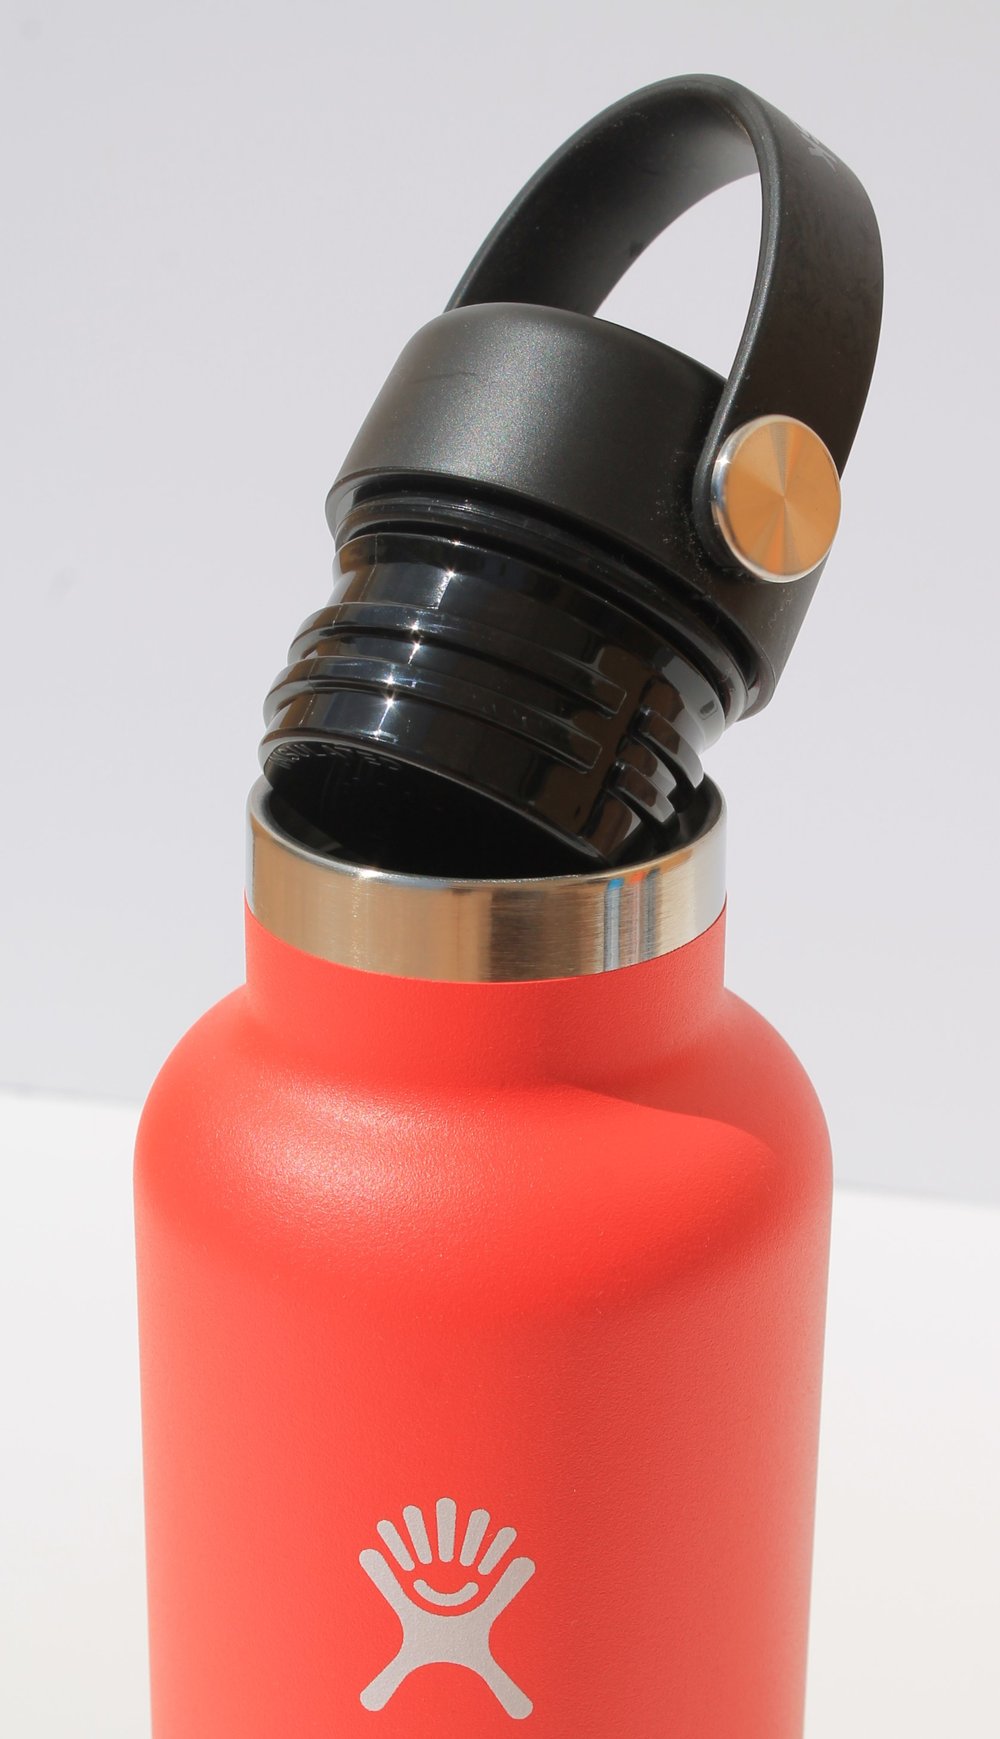 HYQO Plastic Bottles 120 mL with Red Tip Caps and Measurements